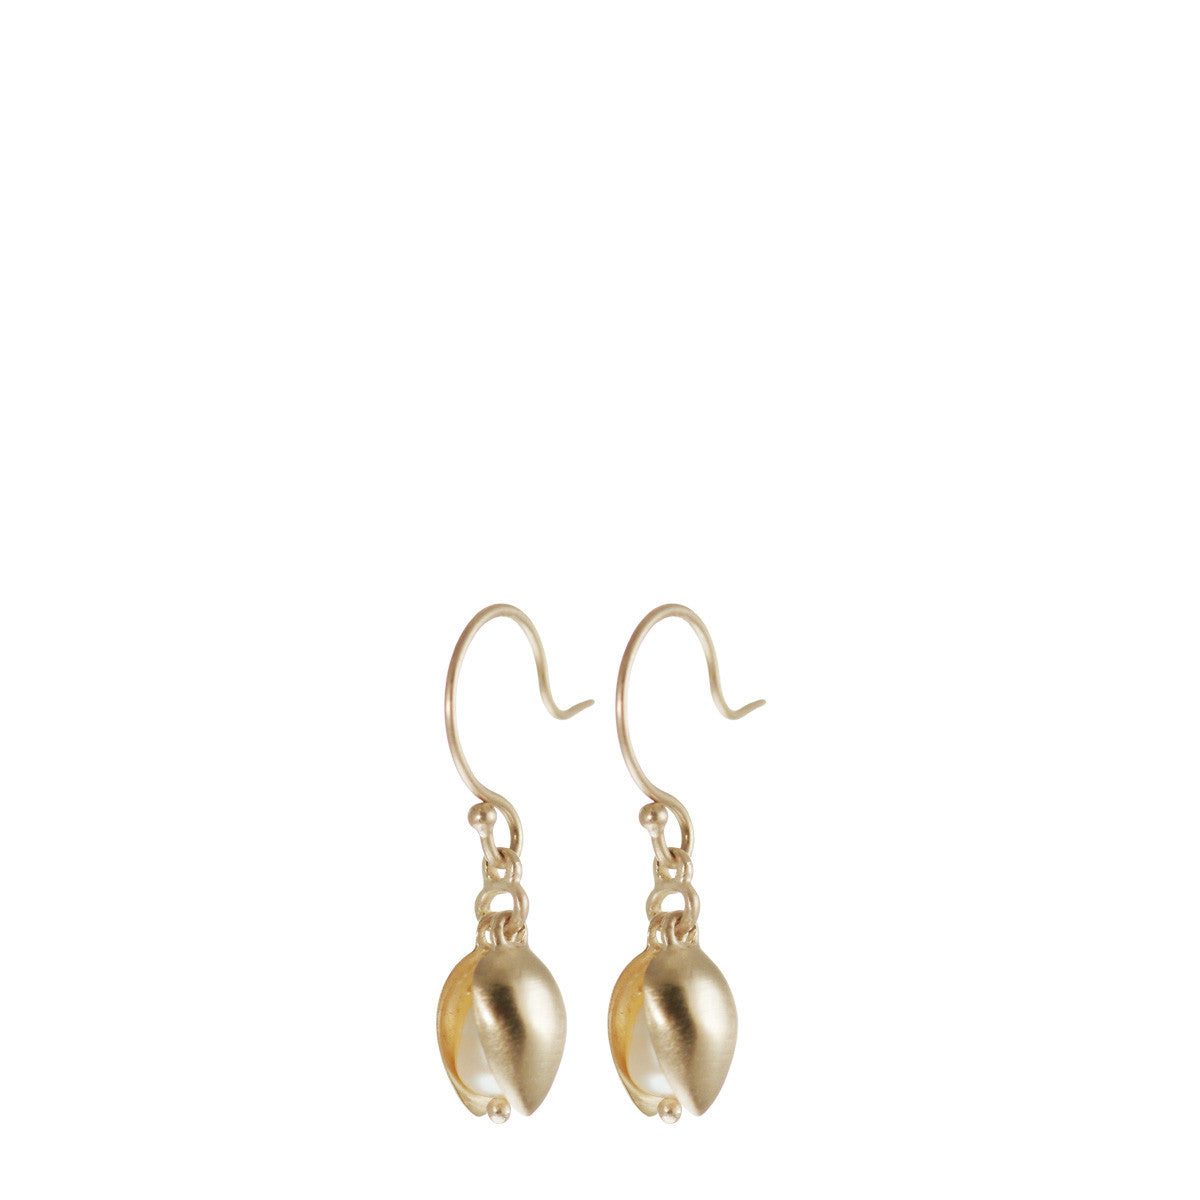 10K Gold Small Double Pod Earrings with Pearls